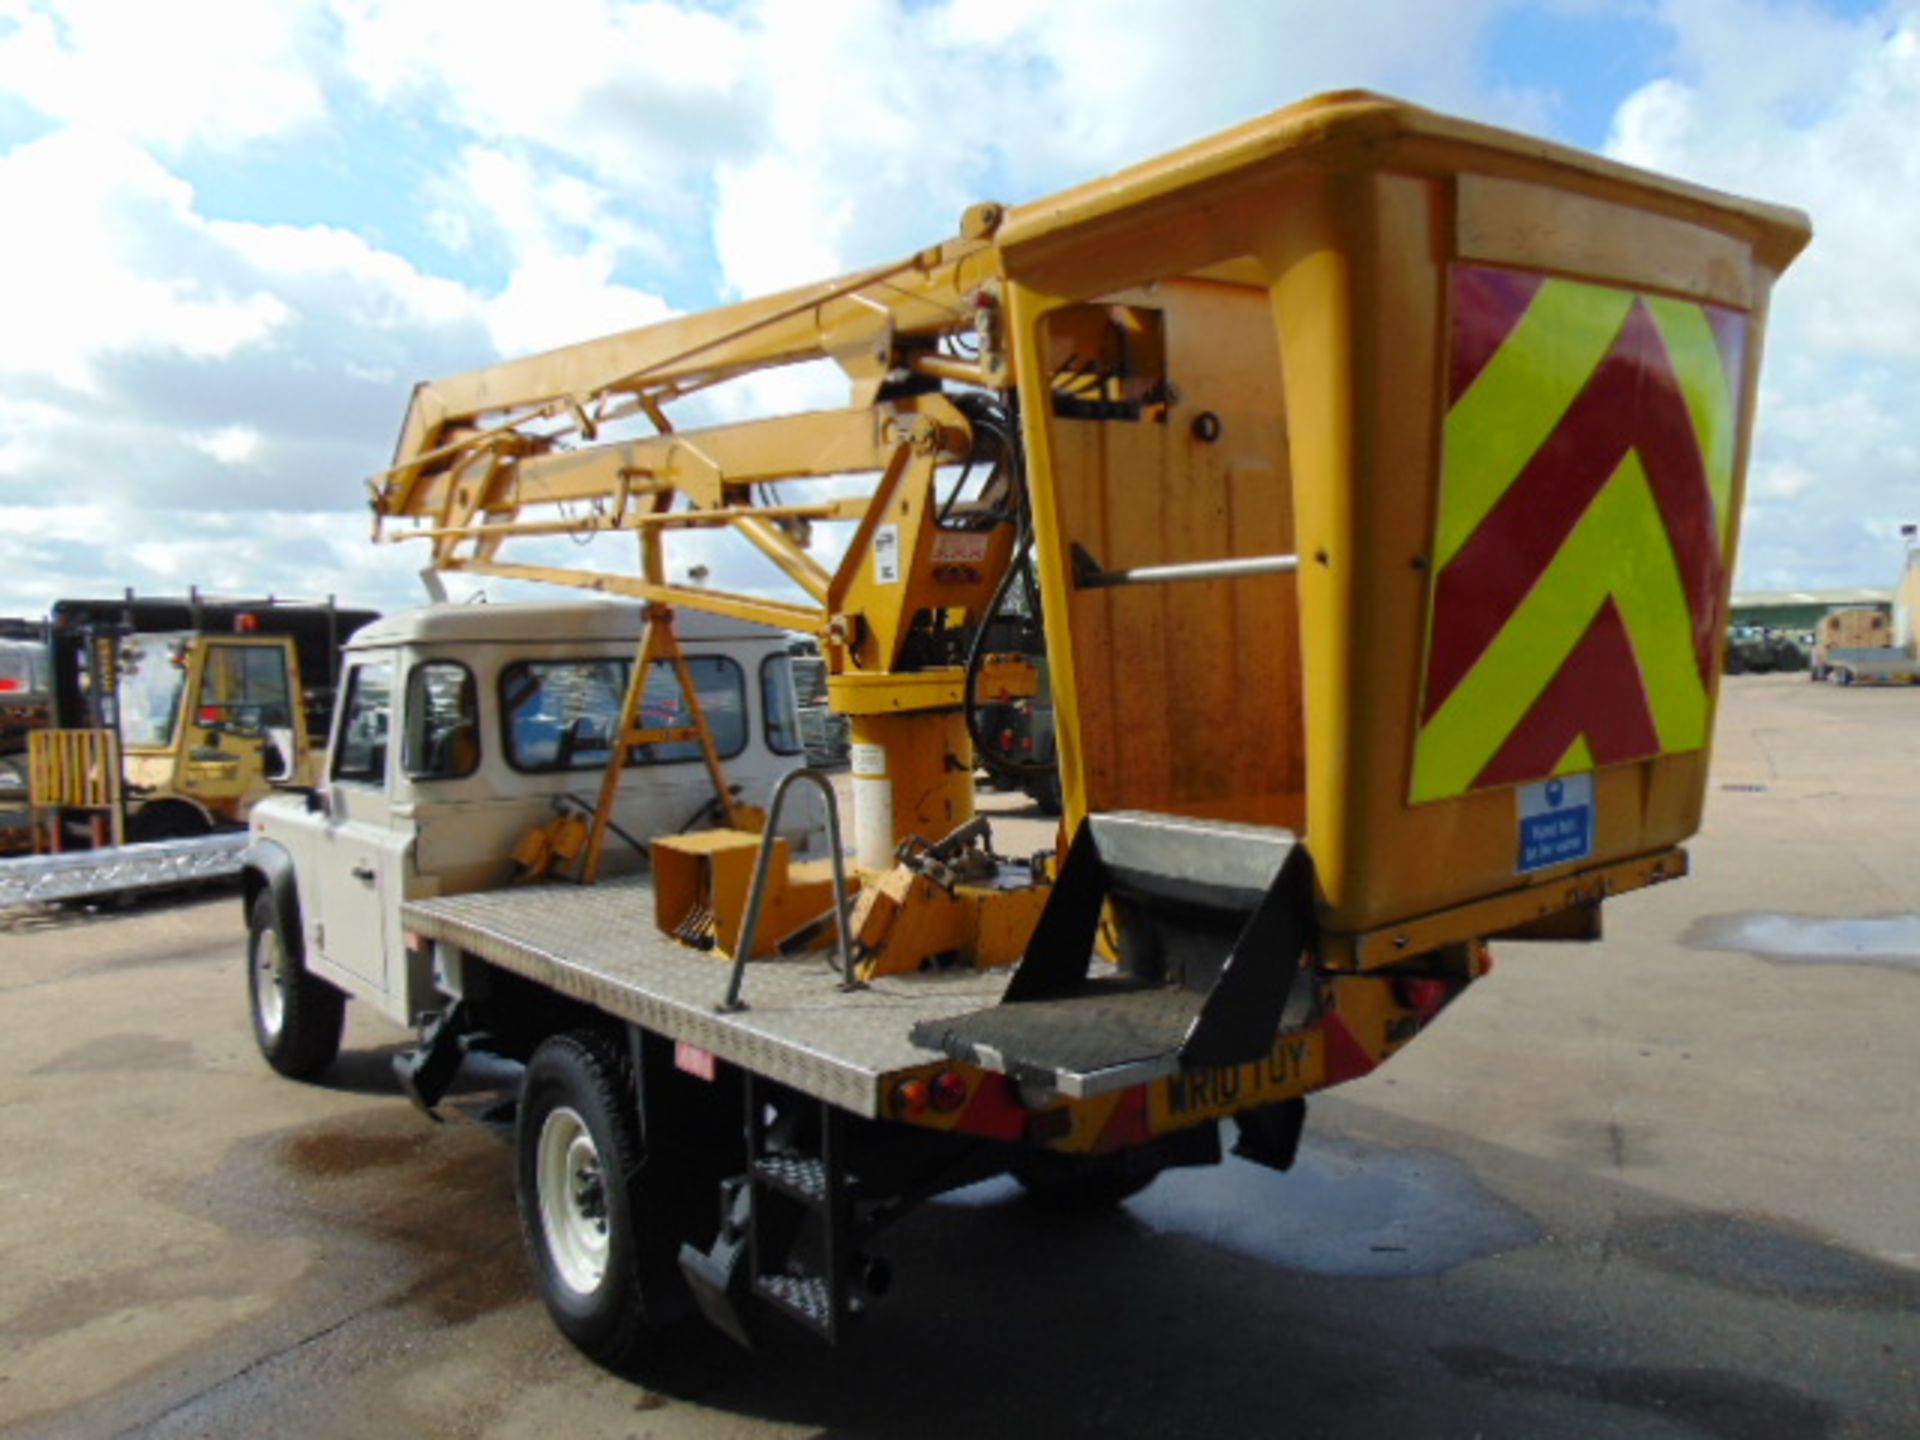 2010 Land Rover Defender 130 2.4 Puma Cherry Picker / Access Lift ONLY 83,760 MILES! - Image 11 of 32